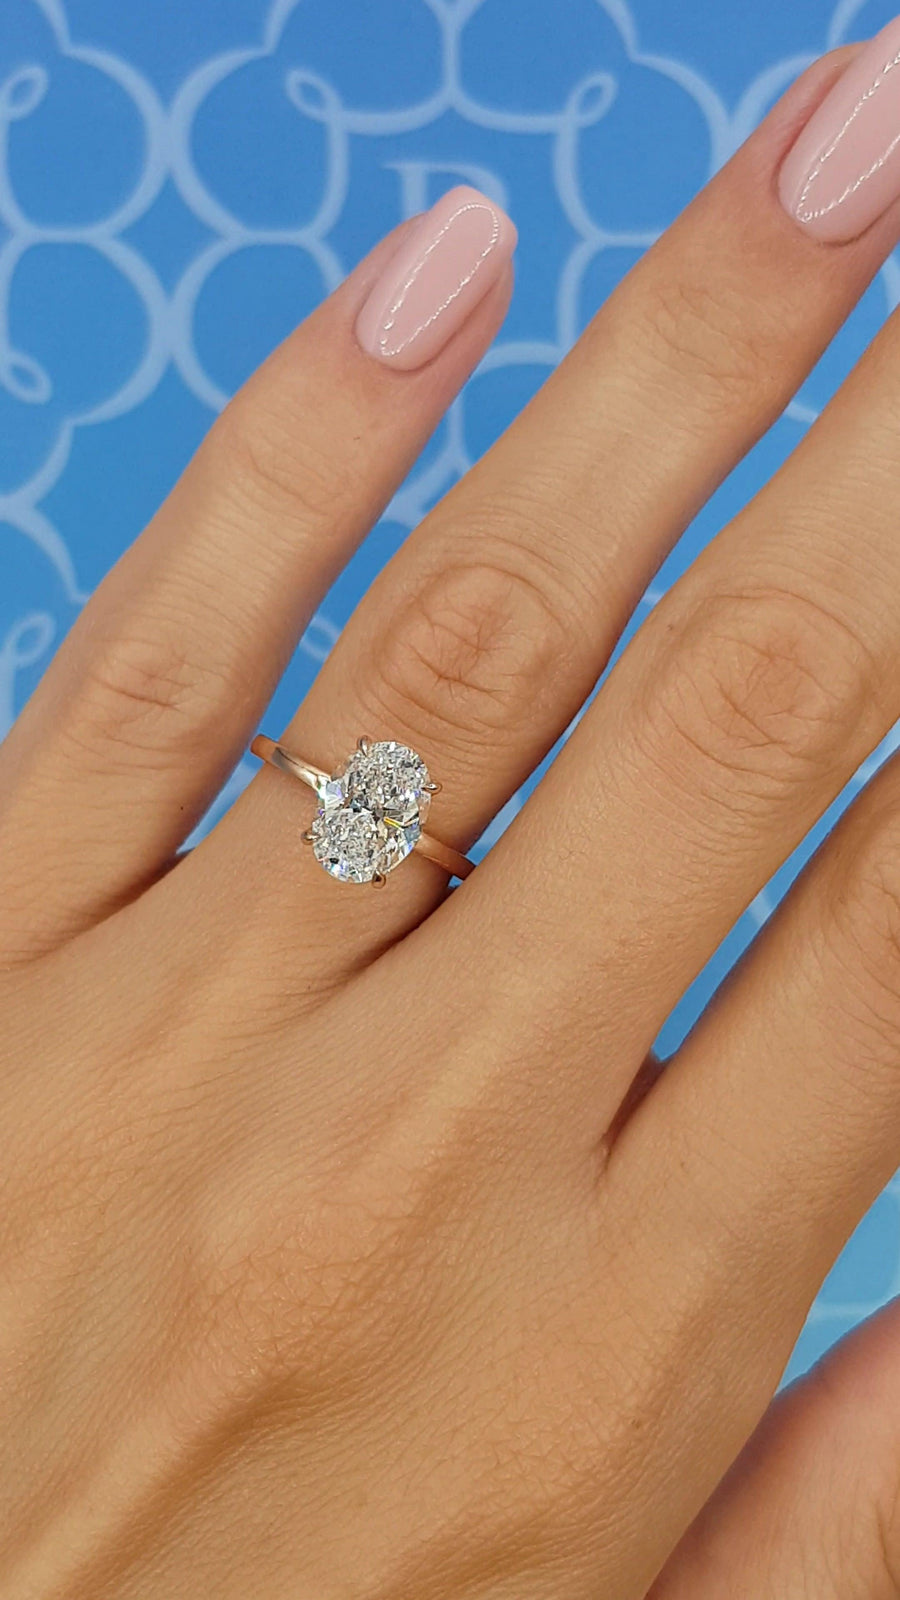 Oval Engagement Rings | Oval Cut | Armans Fine Jewellery Sydney